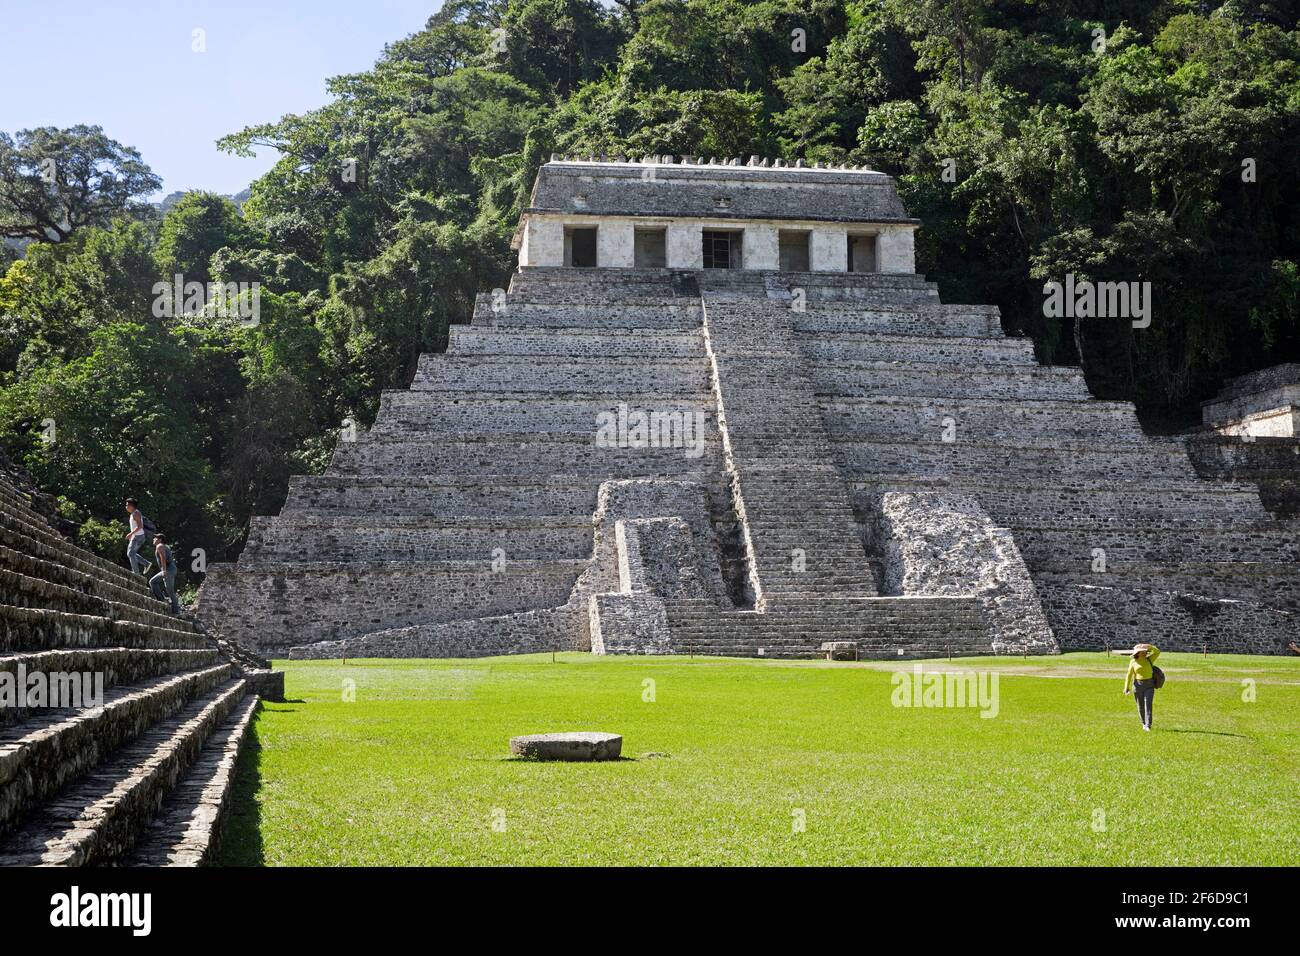 Temple of the Inscriptions, largest Mesoamerican stepped pyramid structure at the pre-Columbian Maya civilization site of Palenque, Chiapas, Mexico Stock Photo